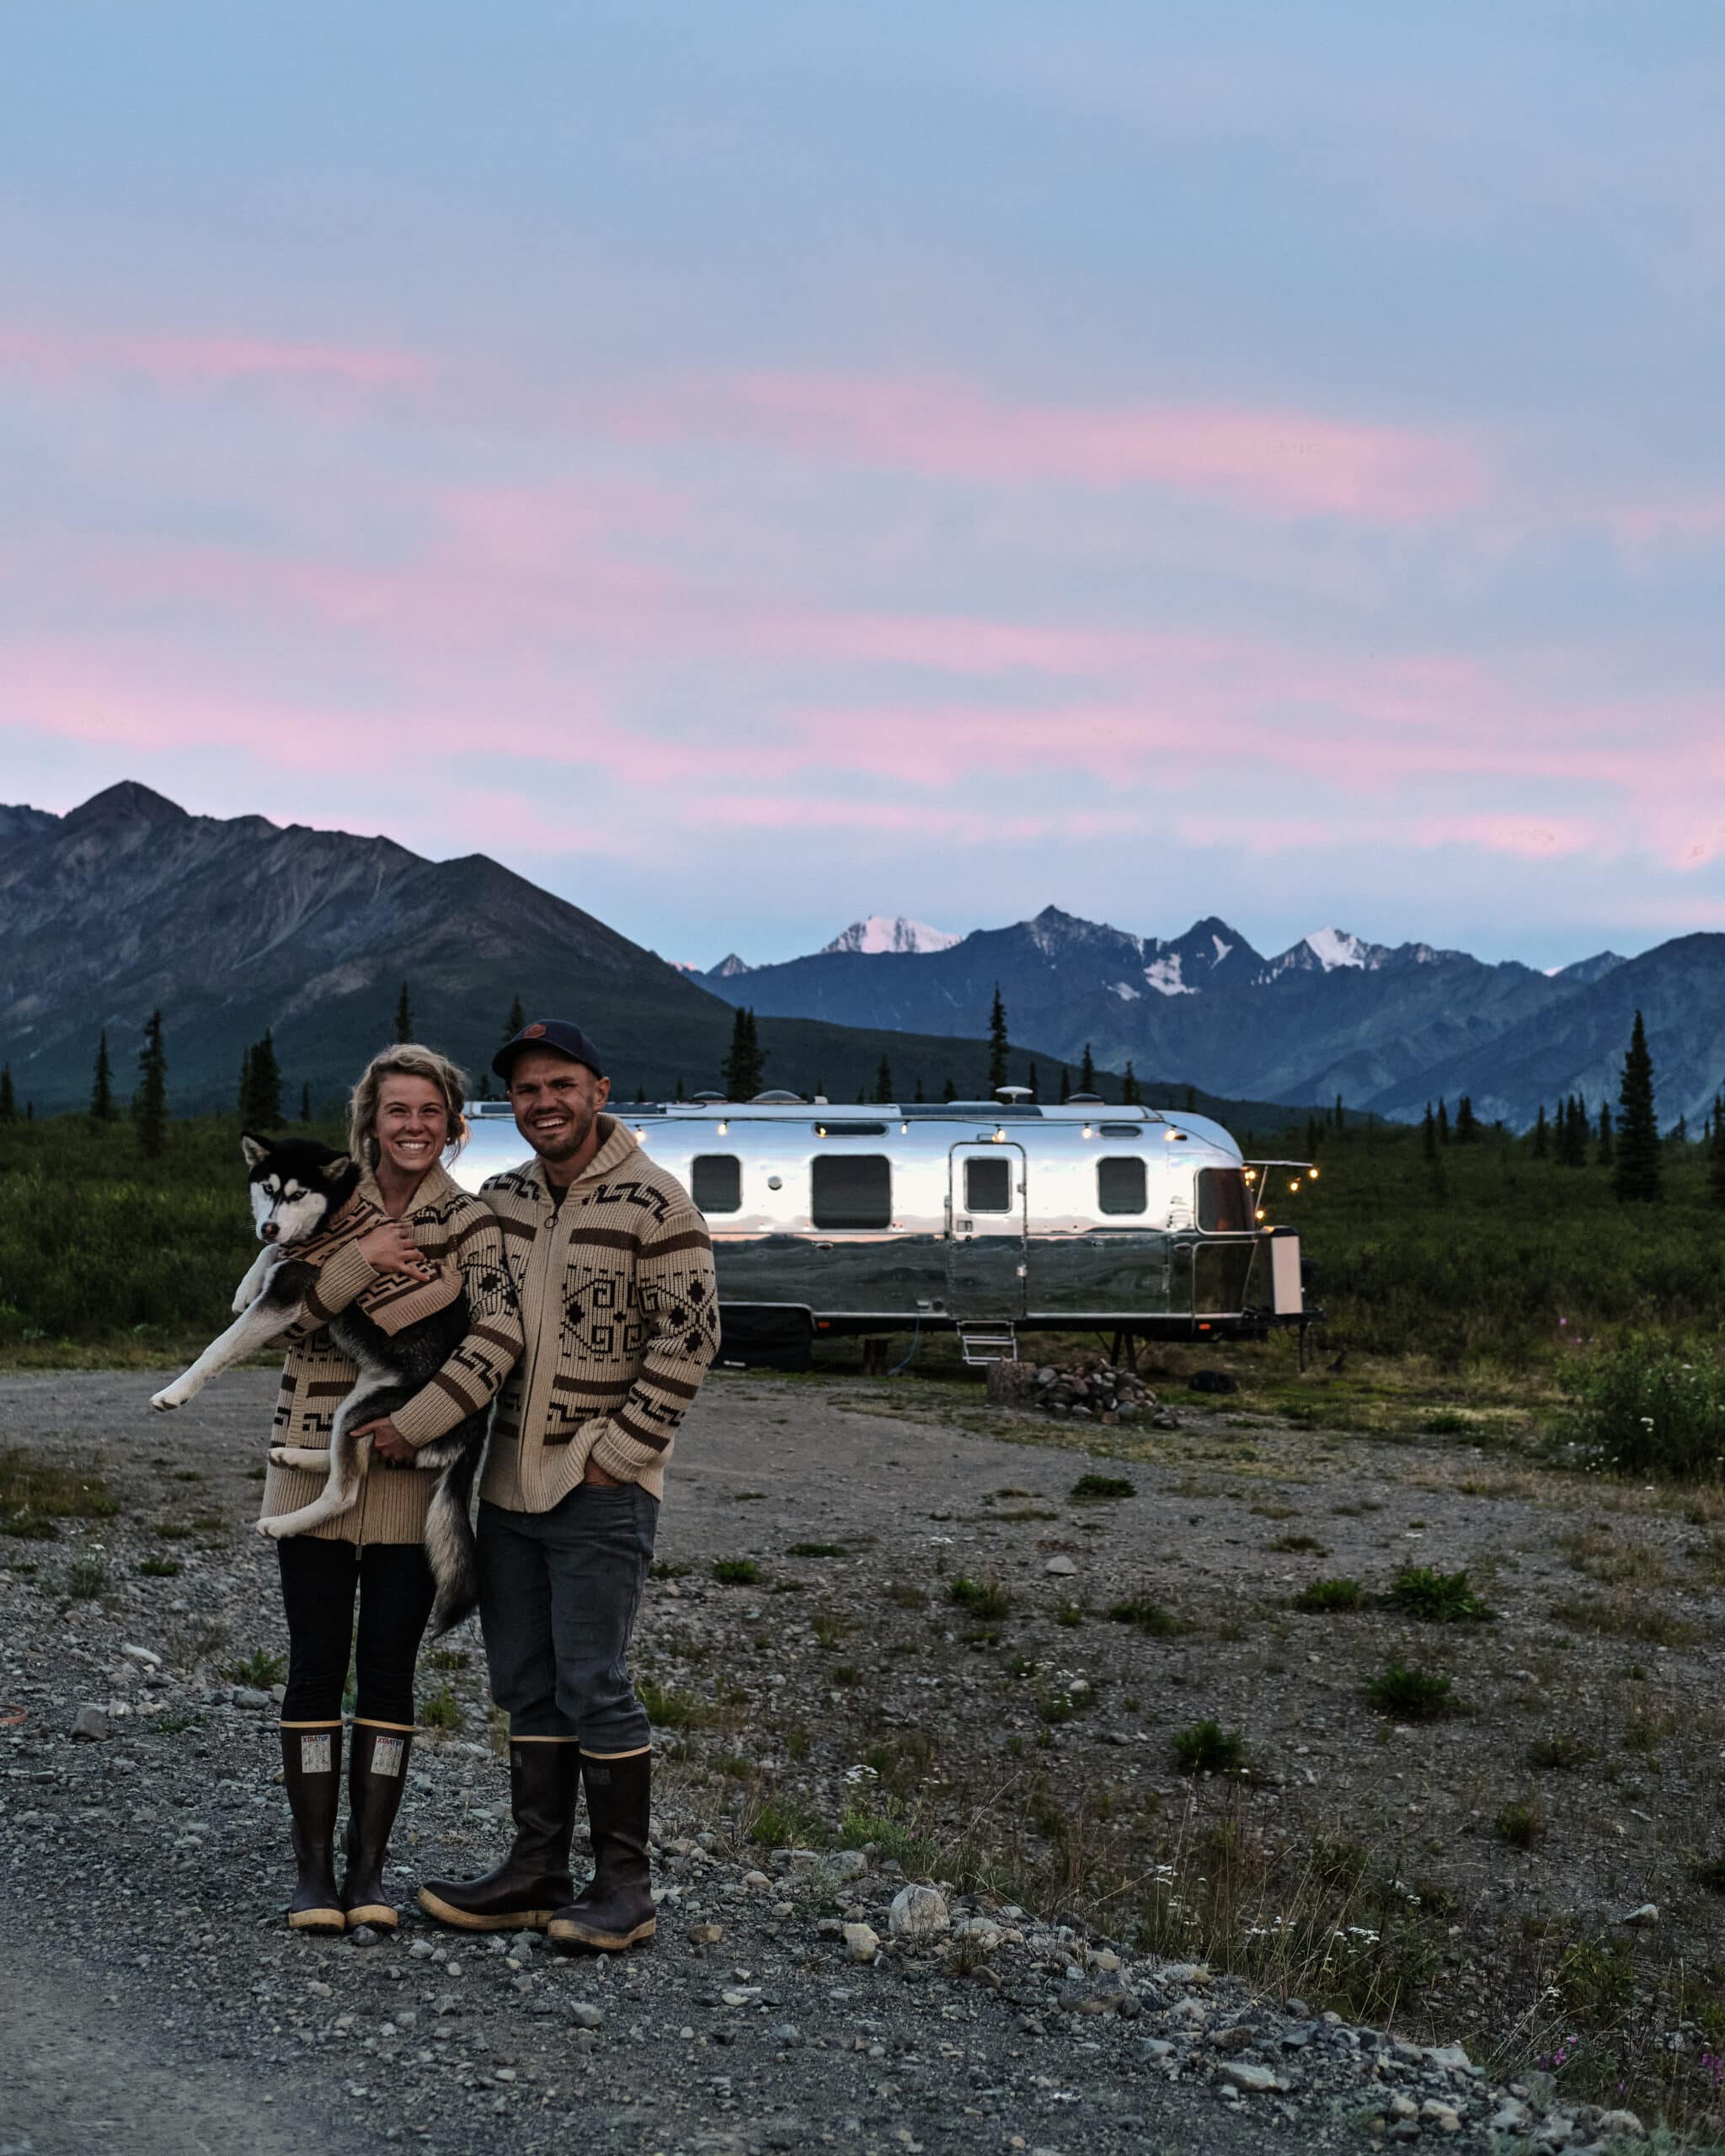 Two People and Their Puppy in Front of Their Airstream Camper in Alaska